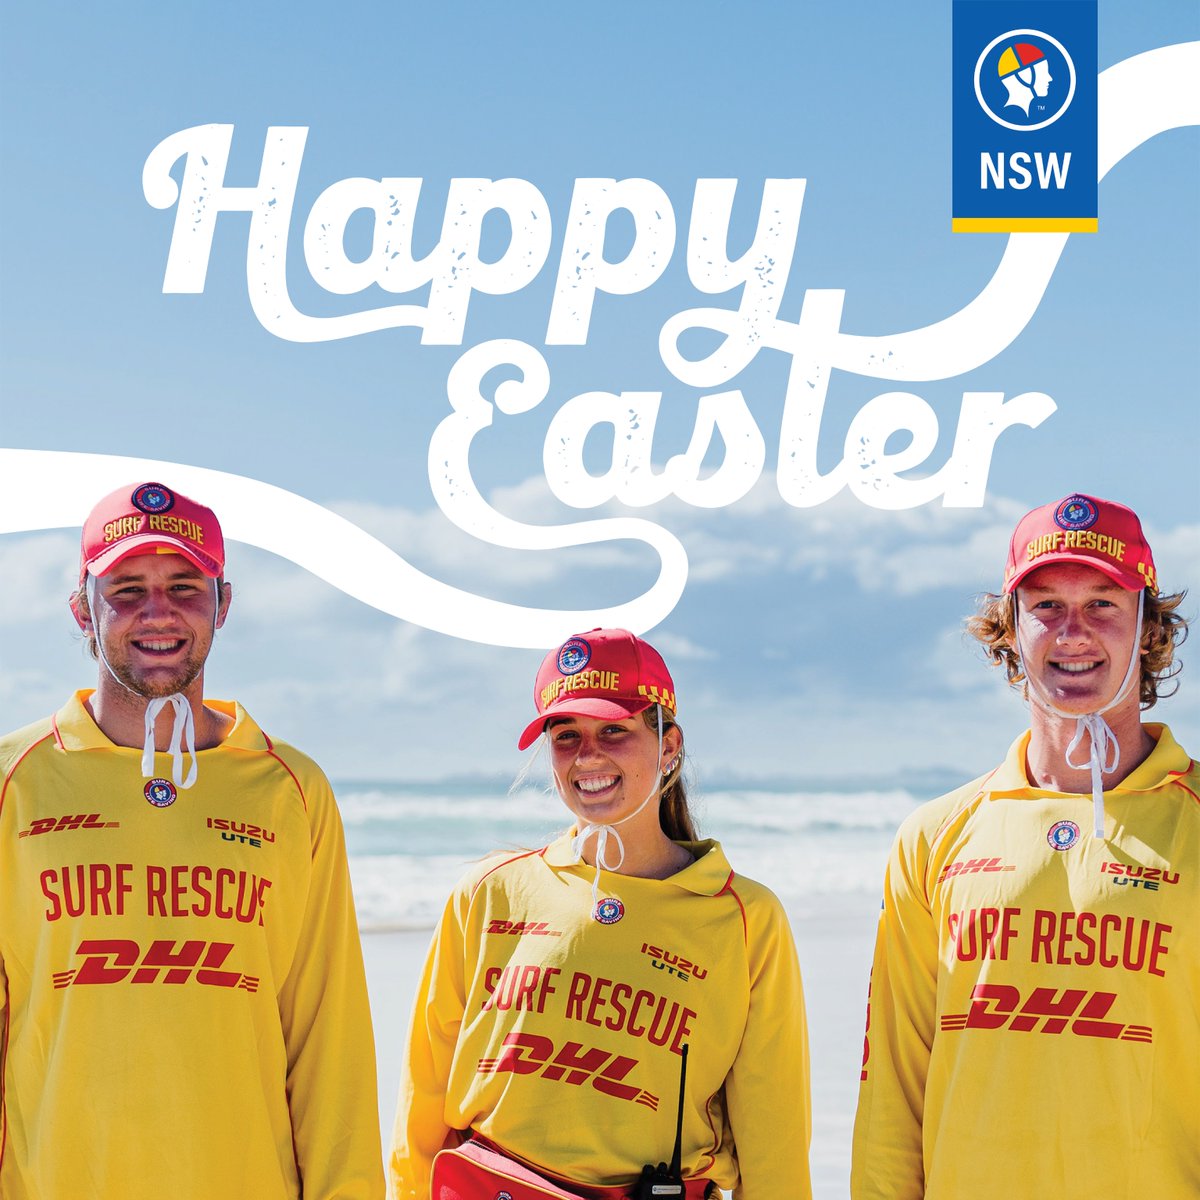 #EASTER // Happy Easter from SLSNSW 🐇 Thank you to all our lifesavers who are taking time out of their day today, and across the long weekend, to keep beach-goers safe. #happyeaster #nswbeaches #lifesaving #volunteers